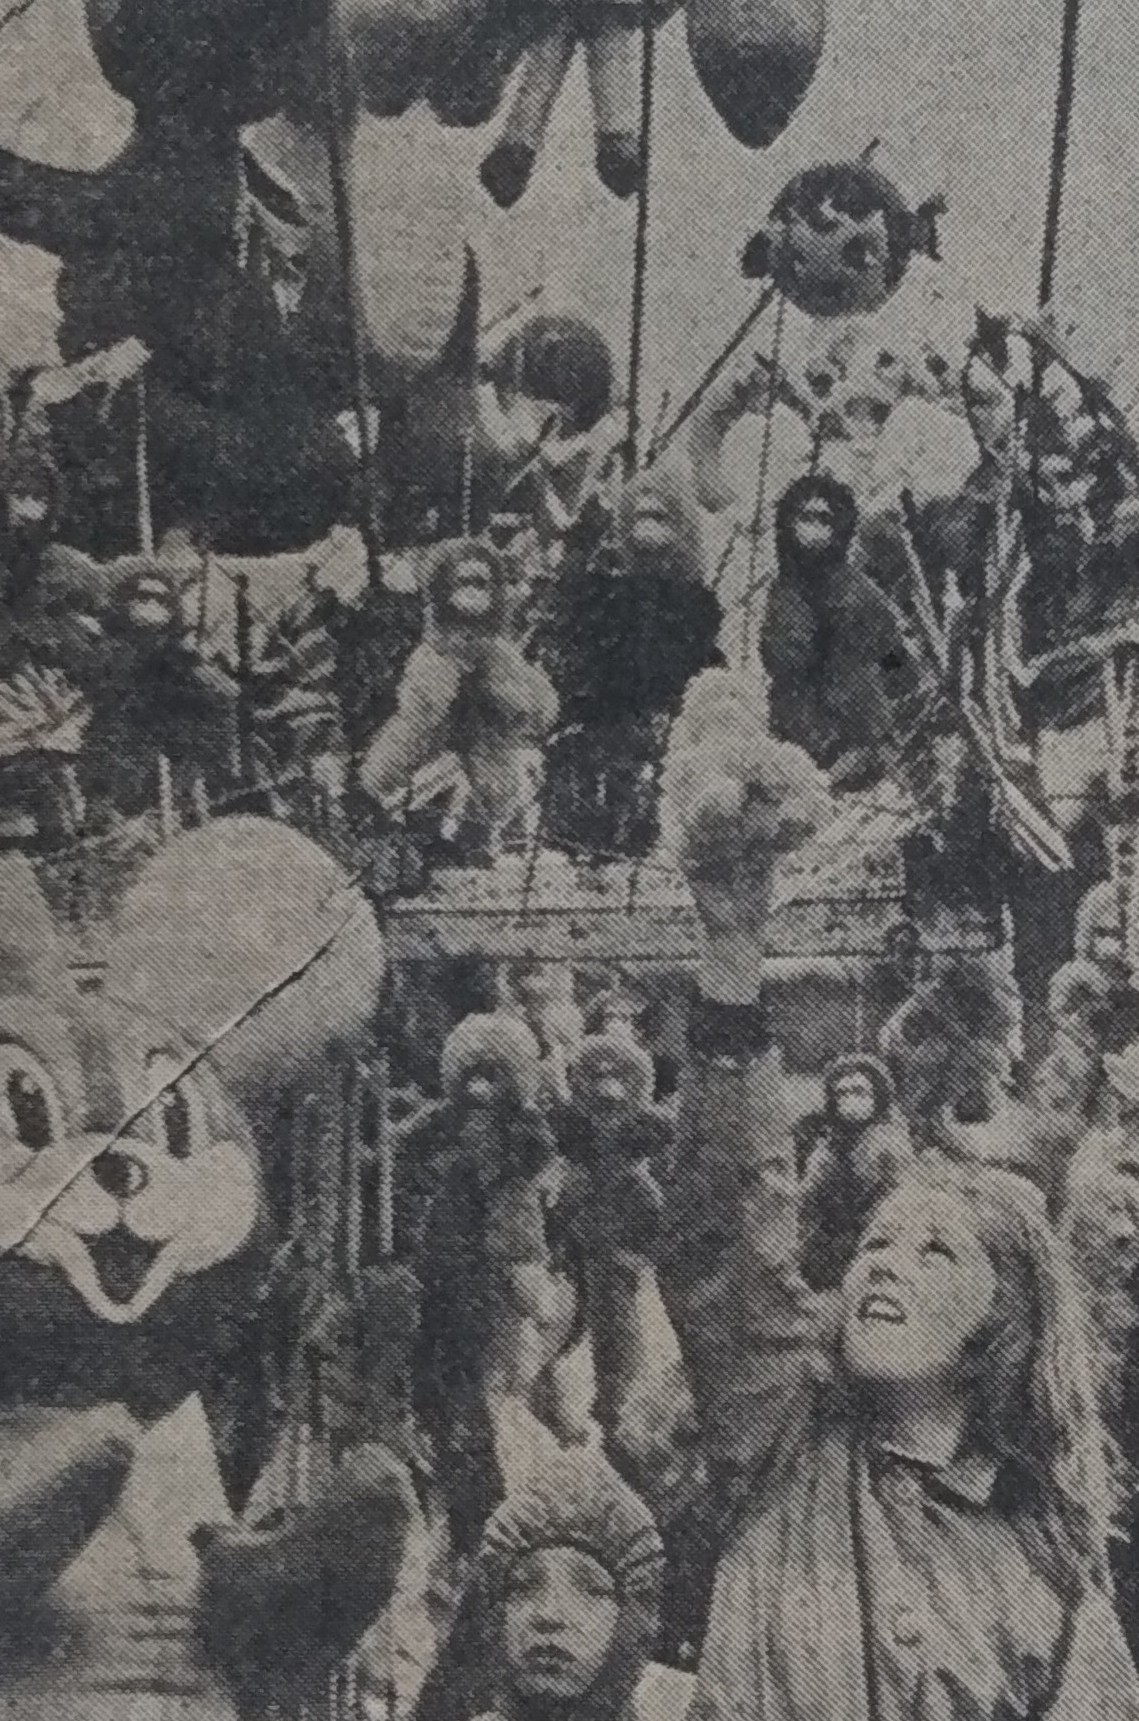 1973 and it rained. But if you wanted a giant balloon or just a monkey on a stick, this was the stall for you